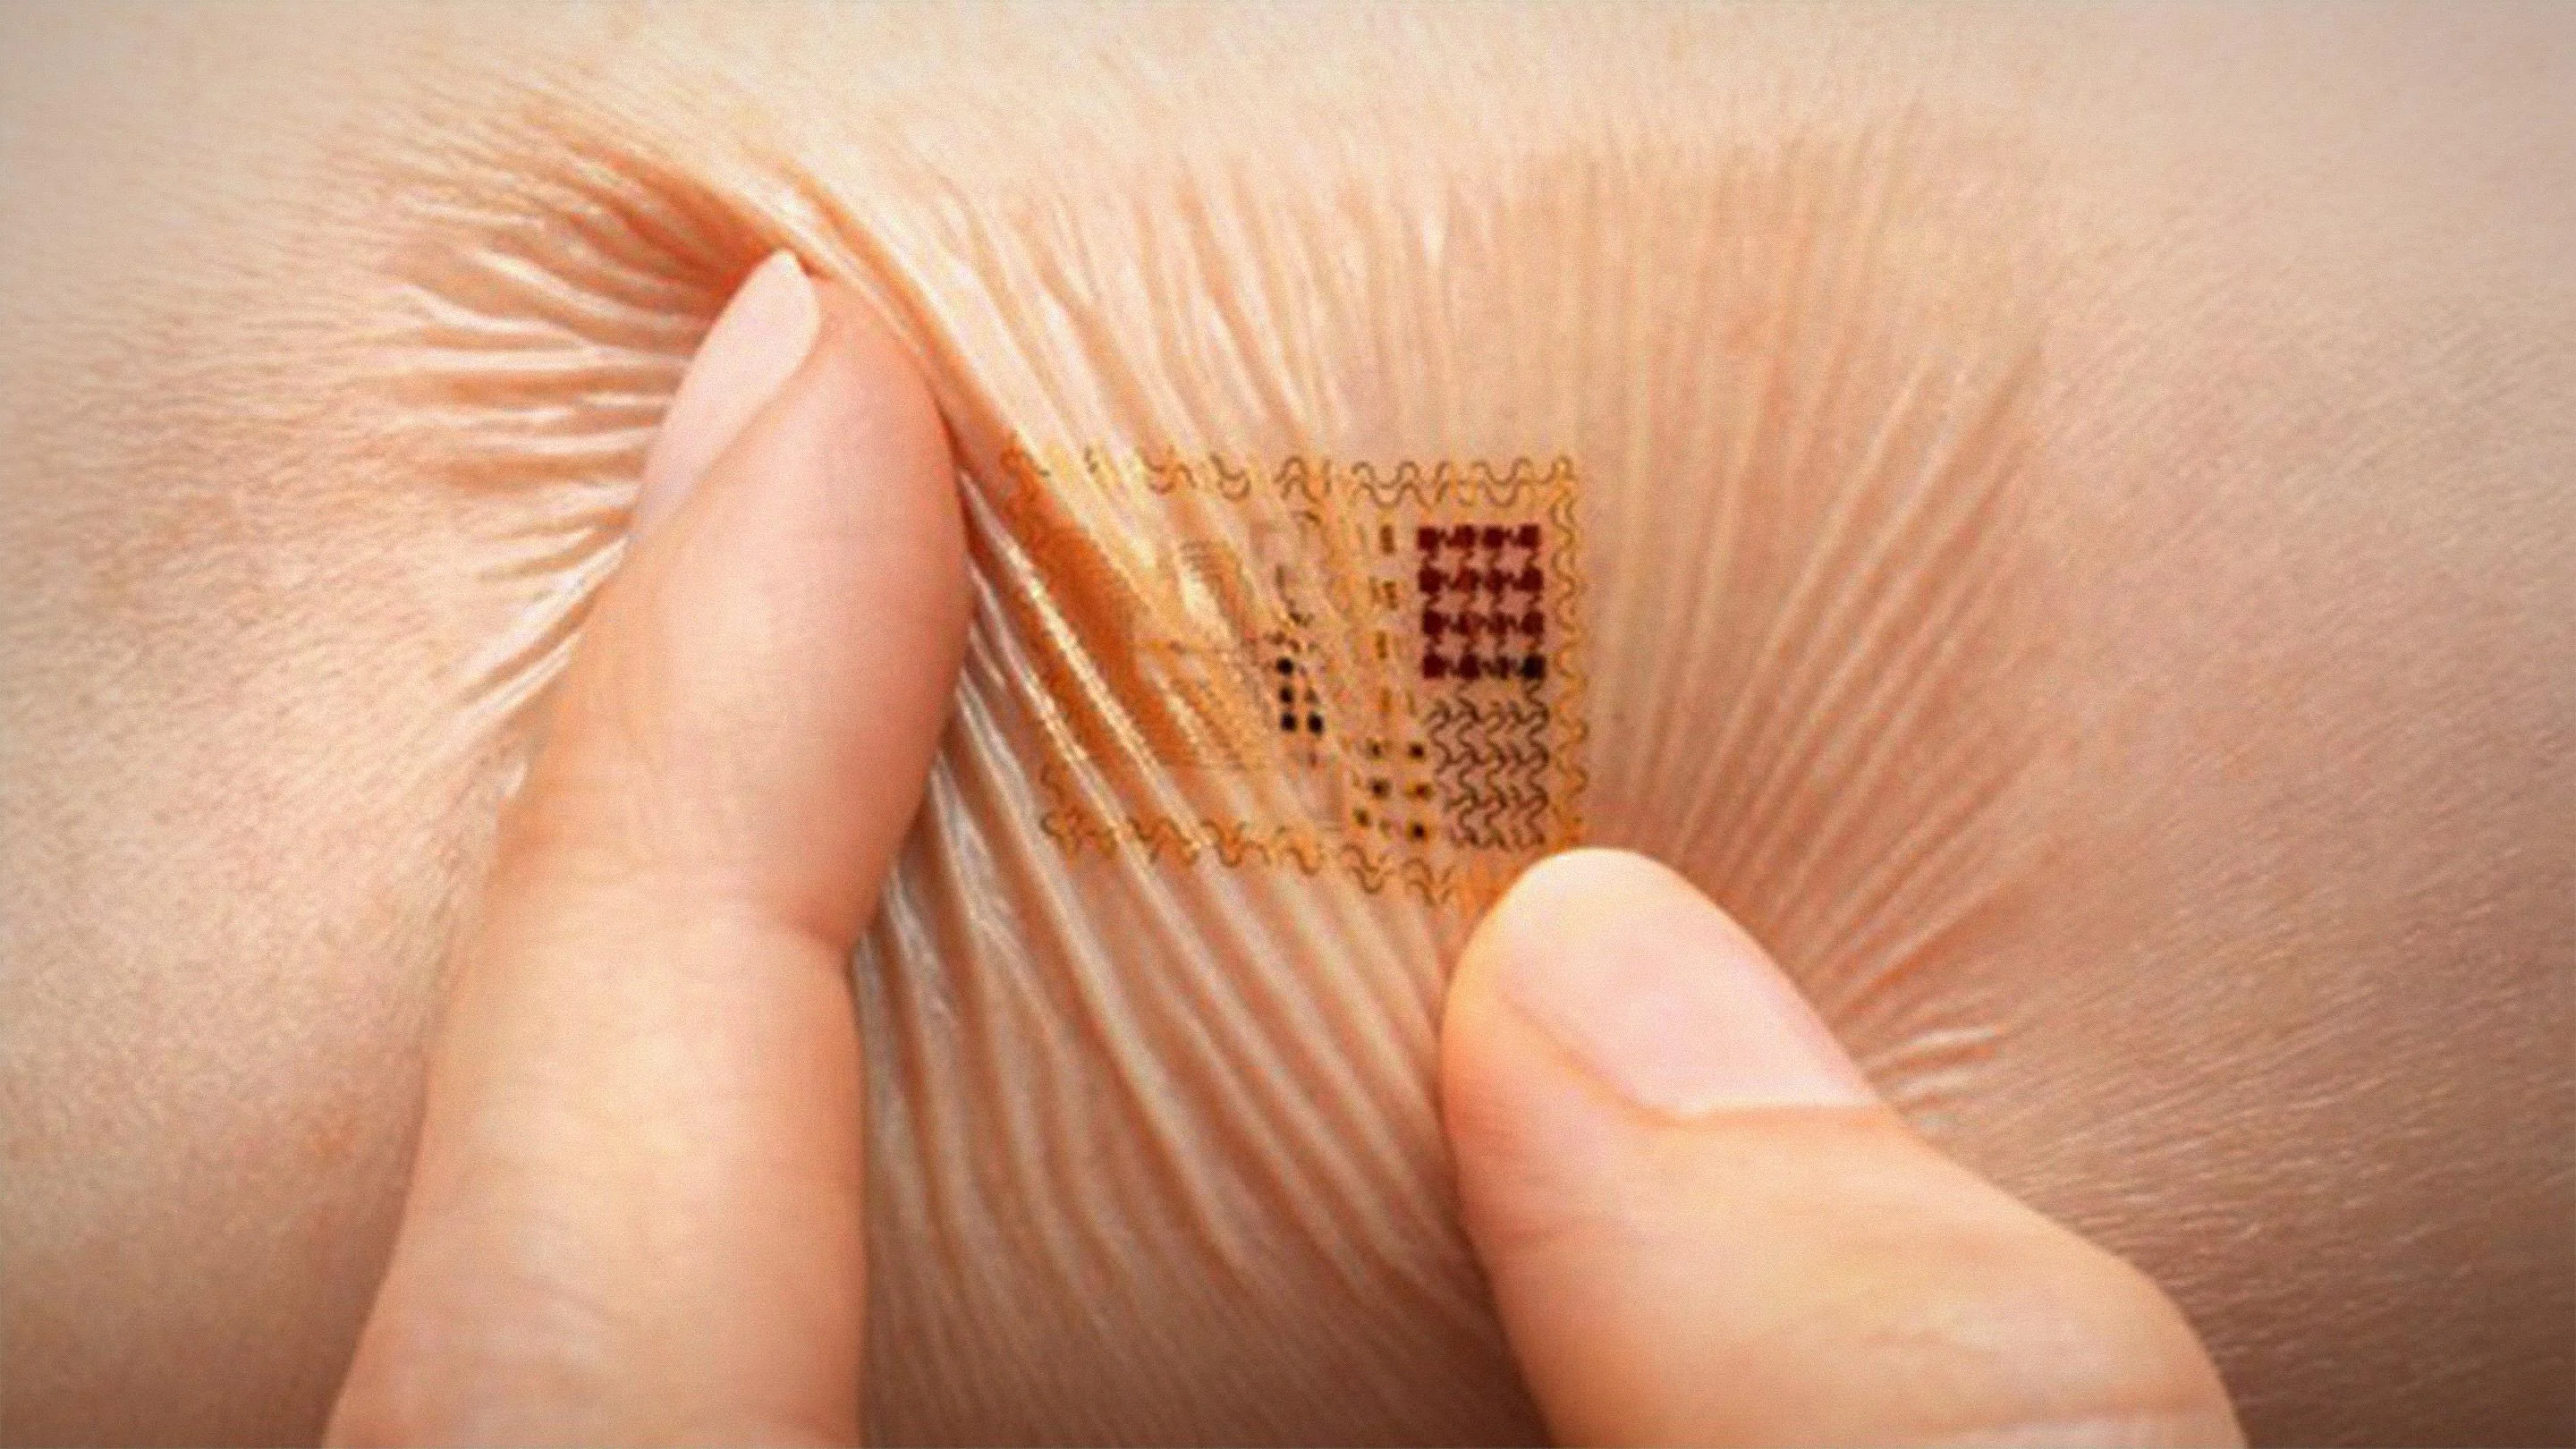 Scientists have created an implant for blood analysis